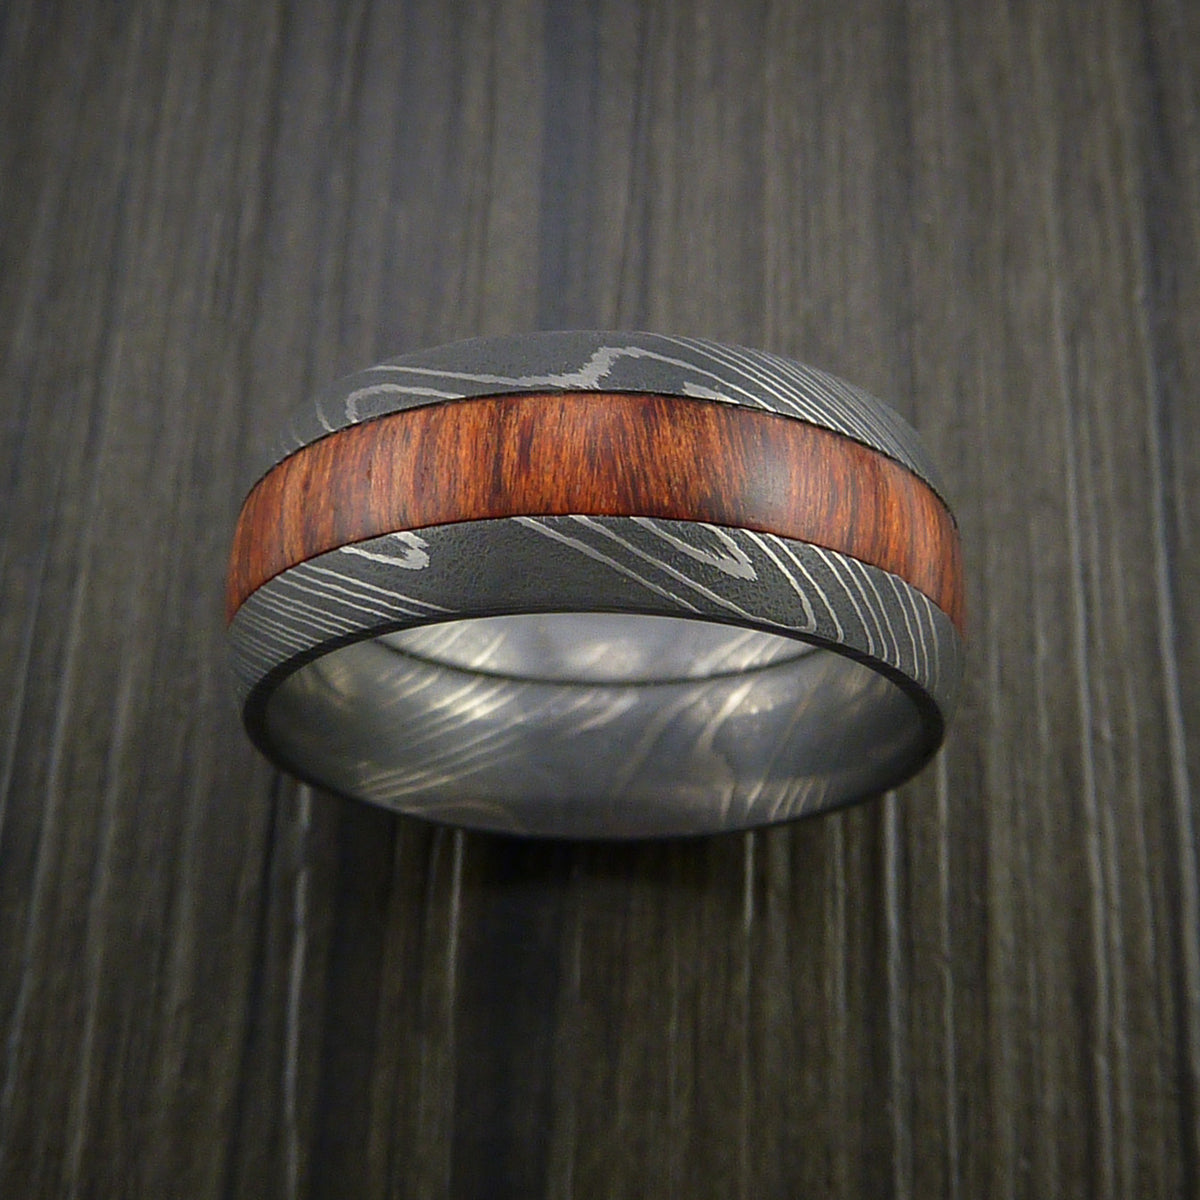 Damascus Steel Men's Ring with Wood Inlay Custom Made Wedding Band ...